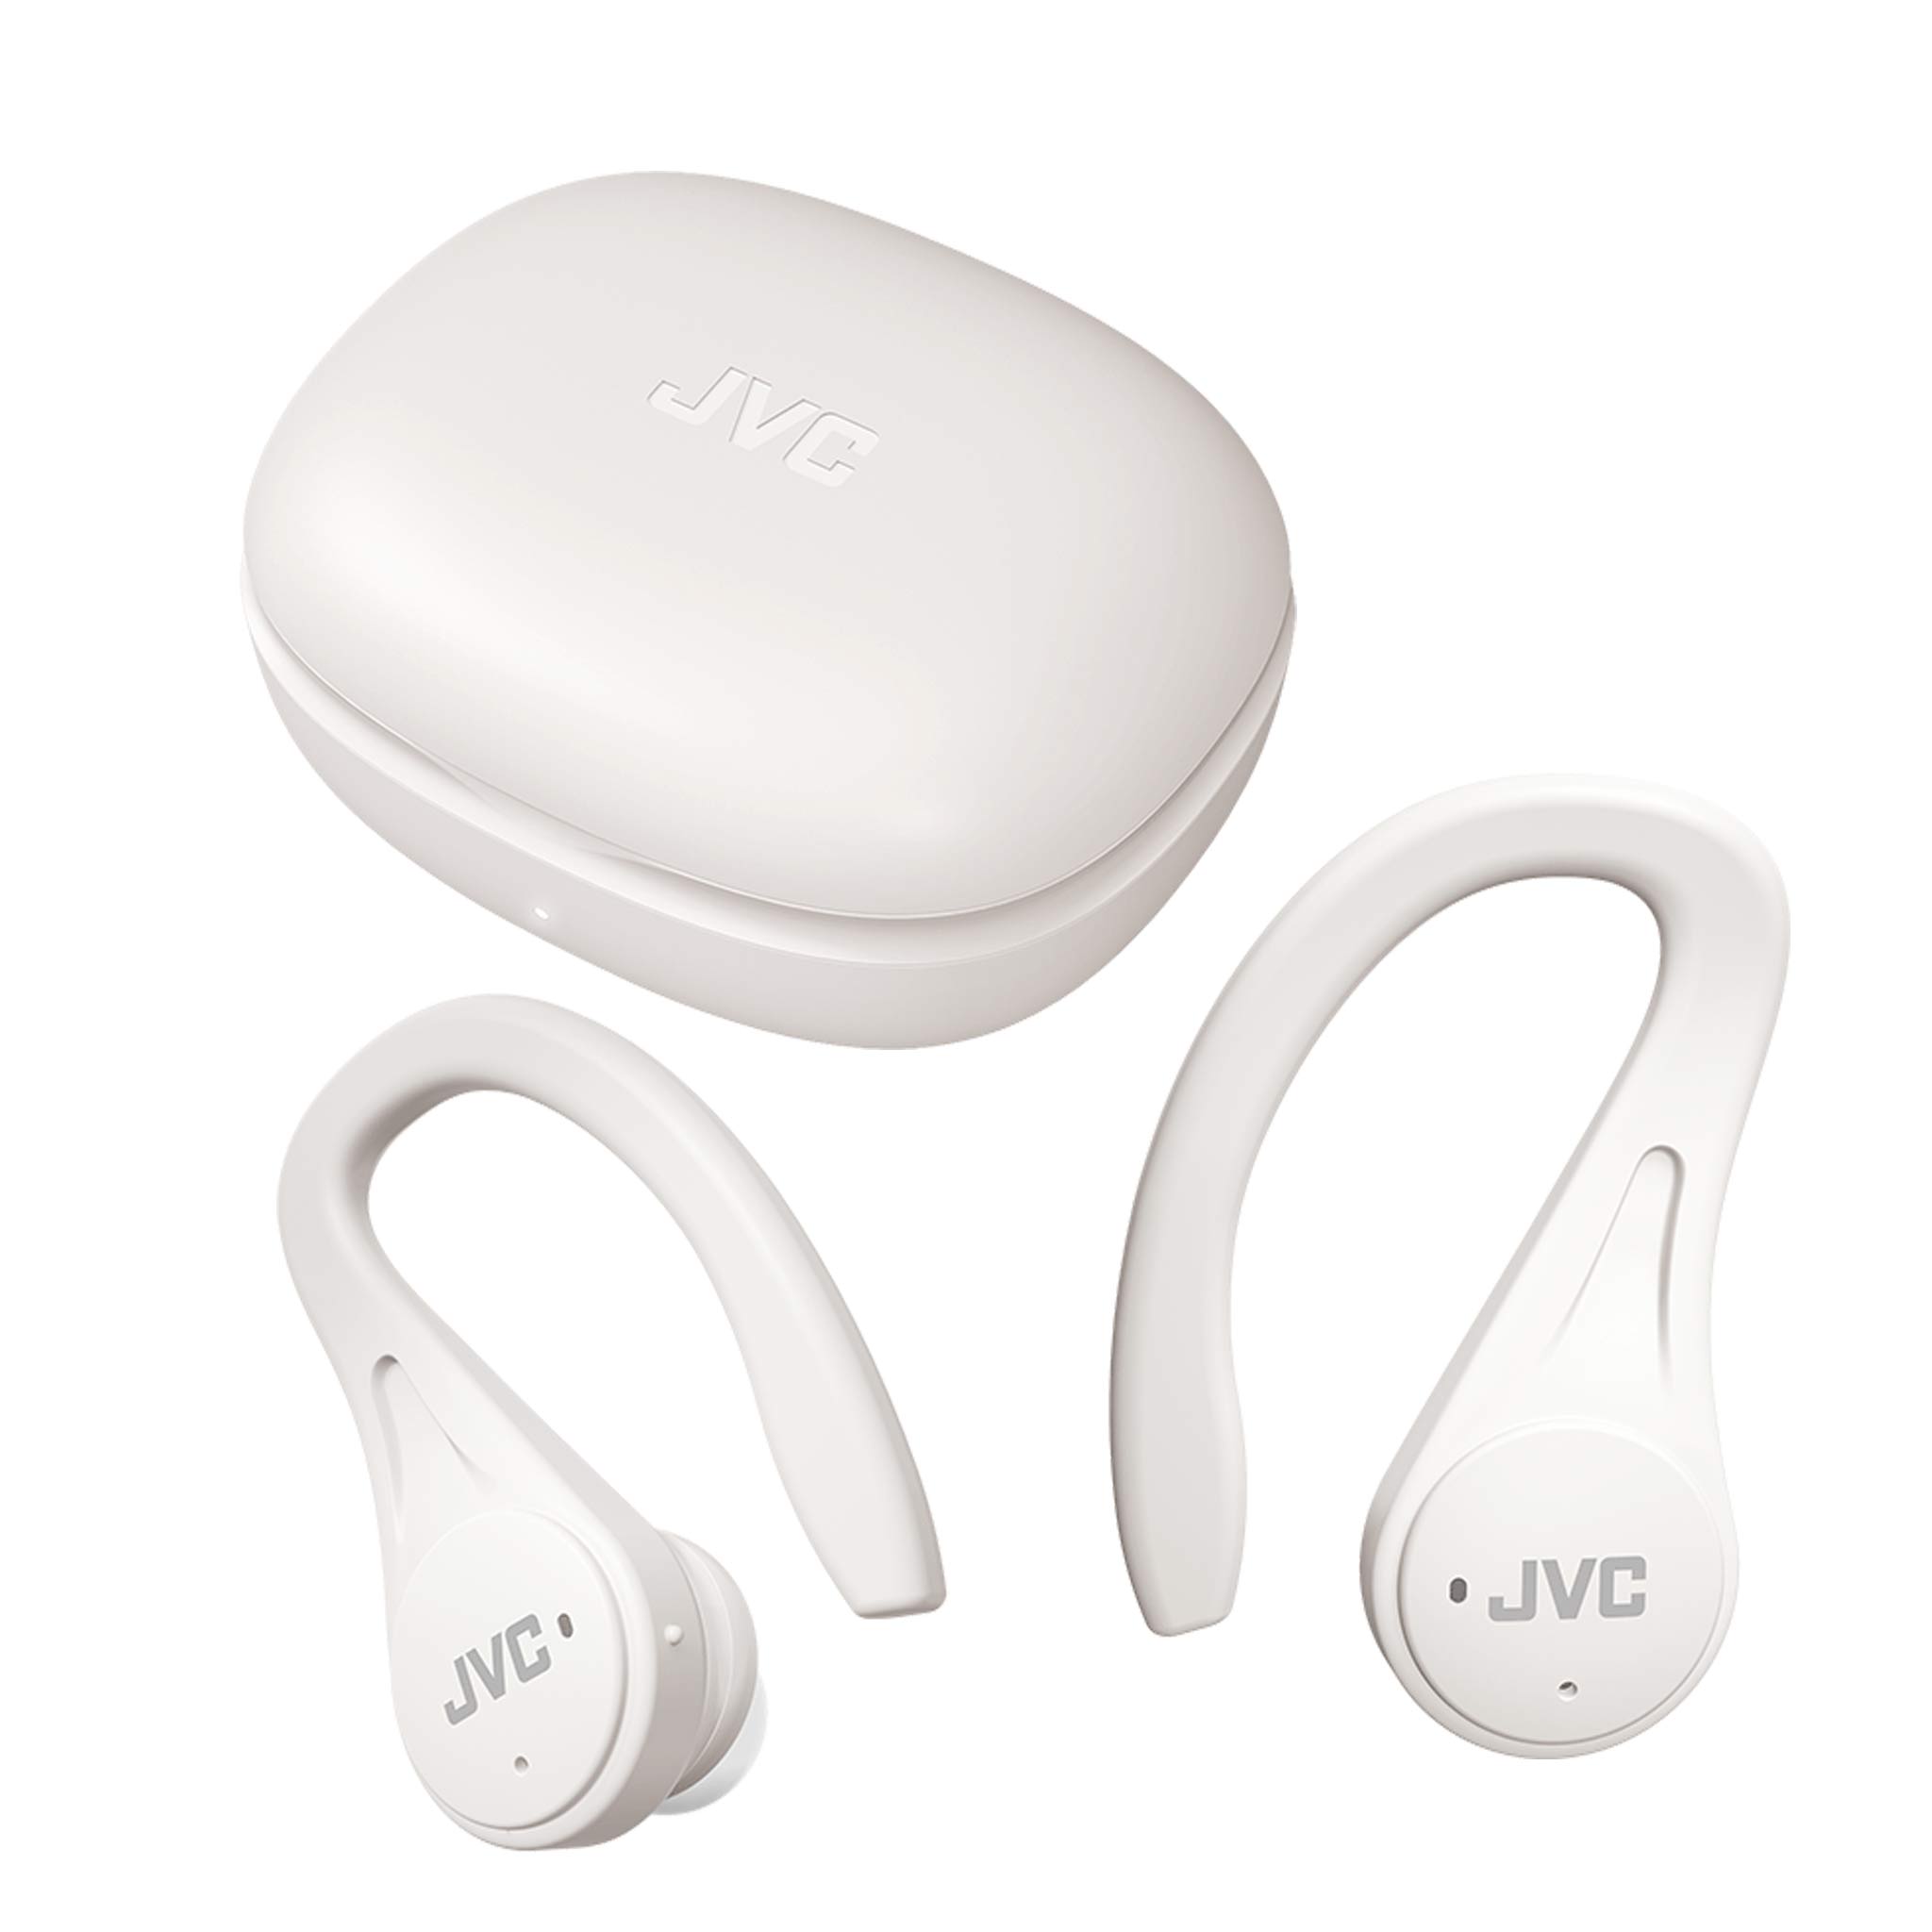 HA-EC25T in White charging case and hook-type earbuds